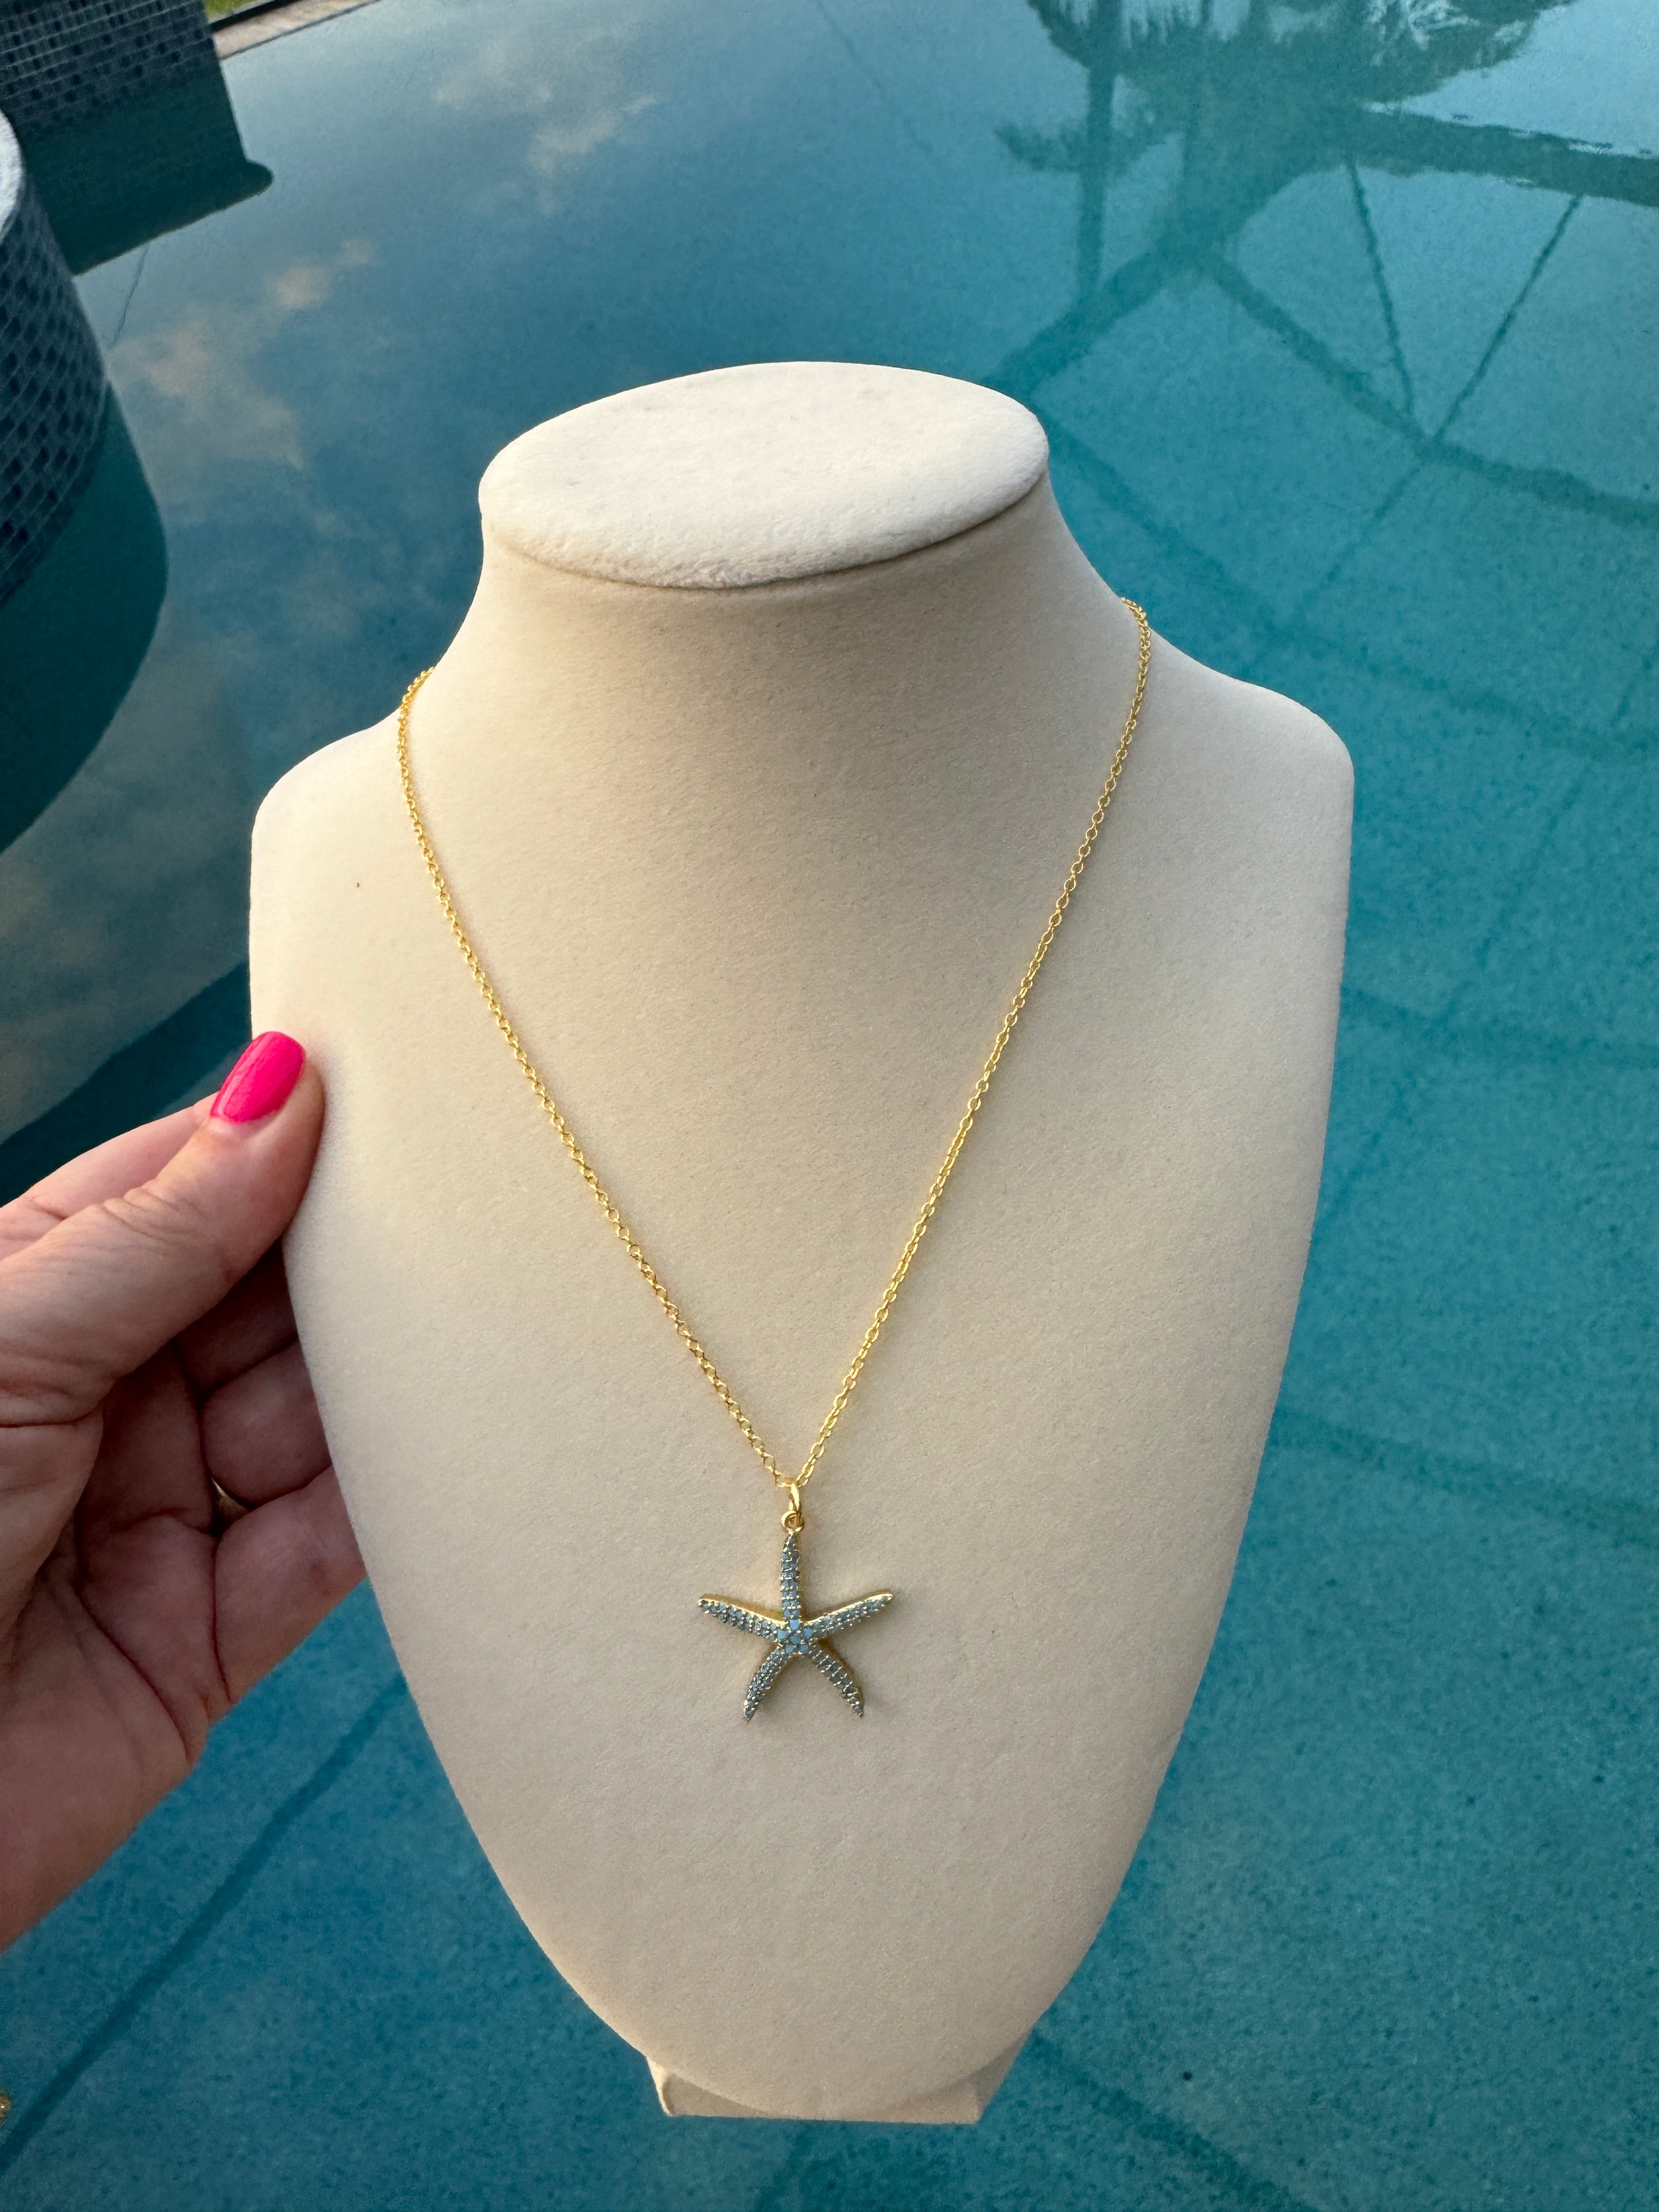 The Starfish Necklace